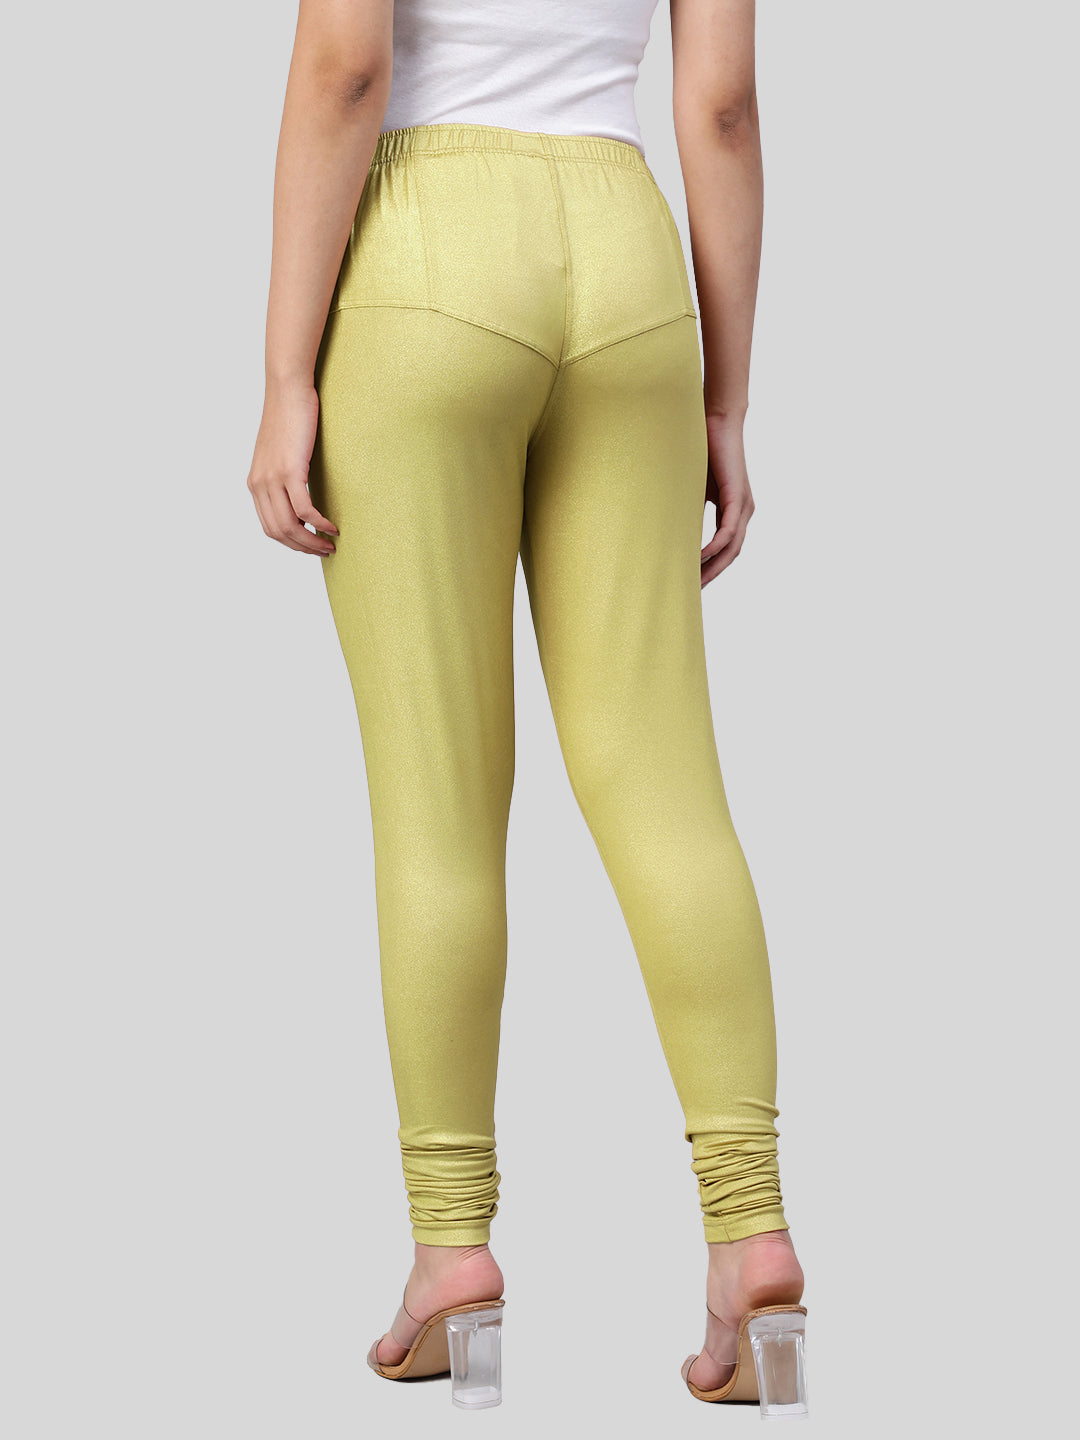 Buy Lux Lyra Ankle Length Legging L14 Romantic Rani Free Size Online at Low  Prices in India at Bigdeals24x7.com